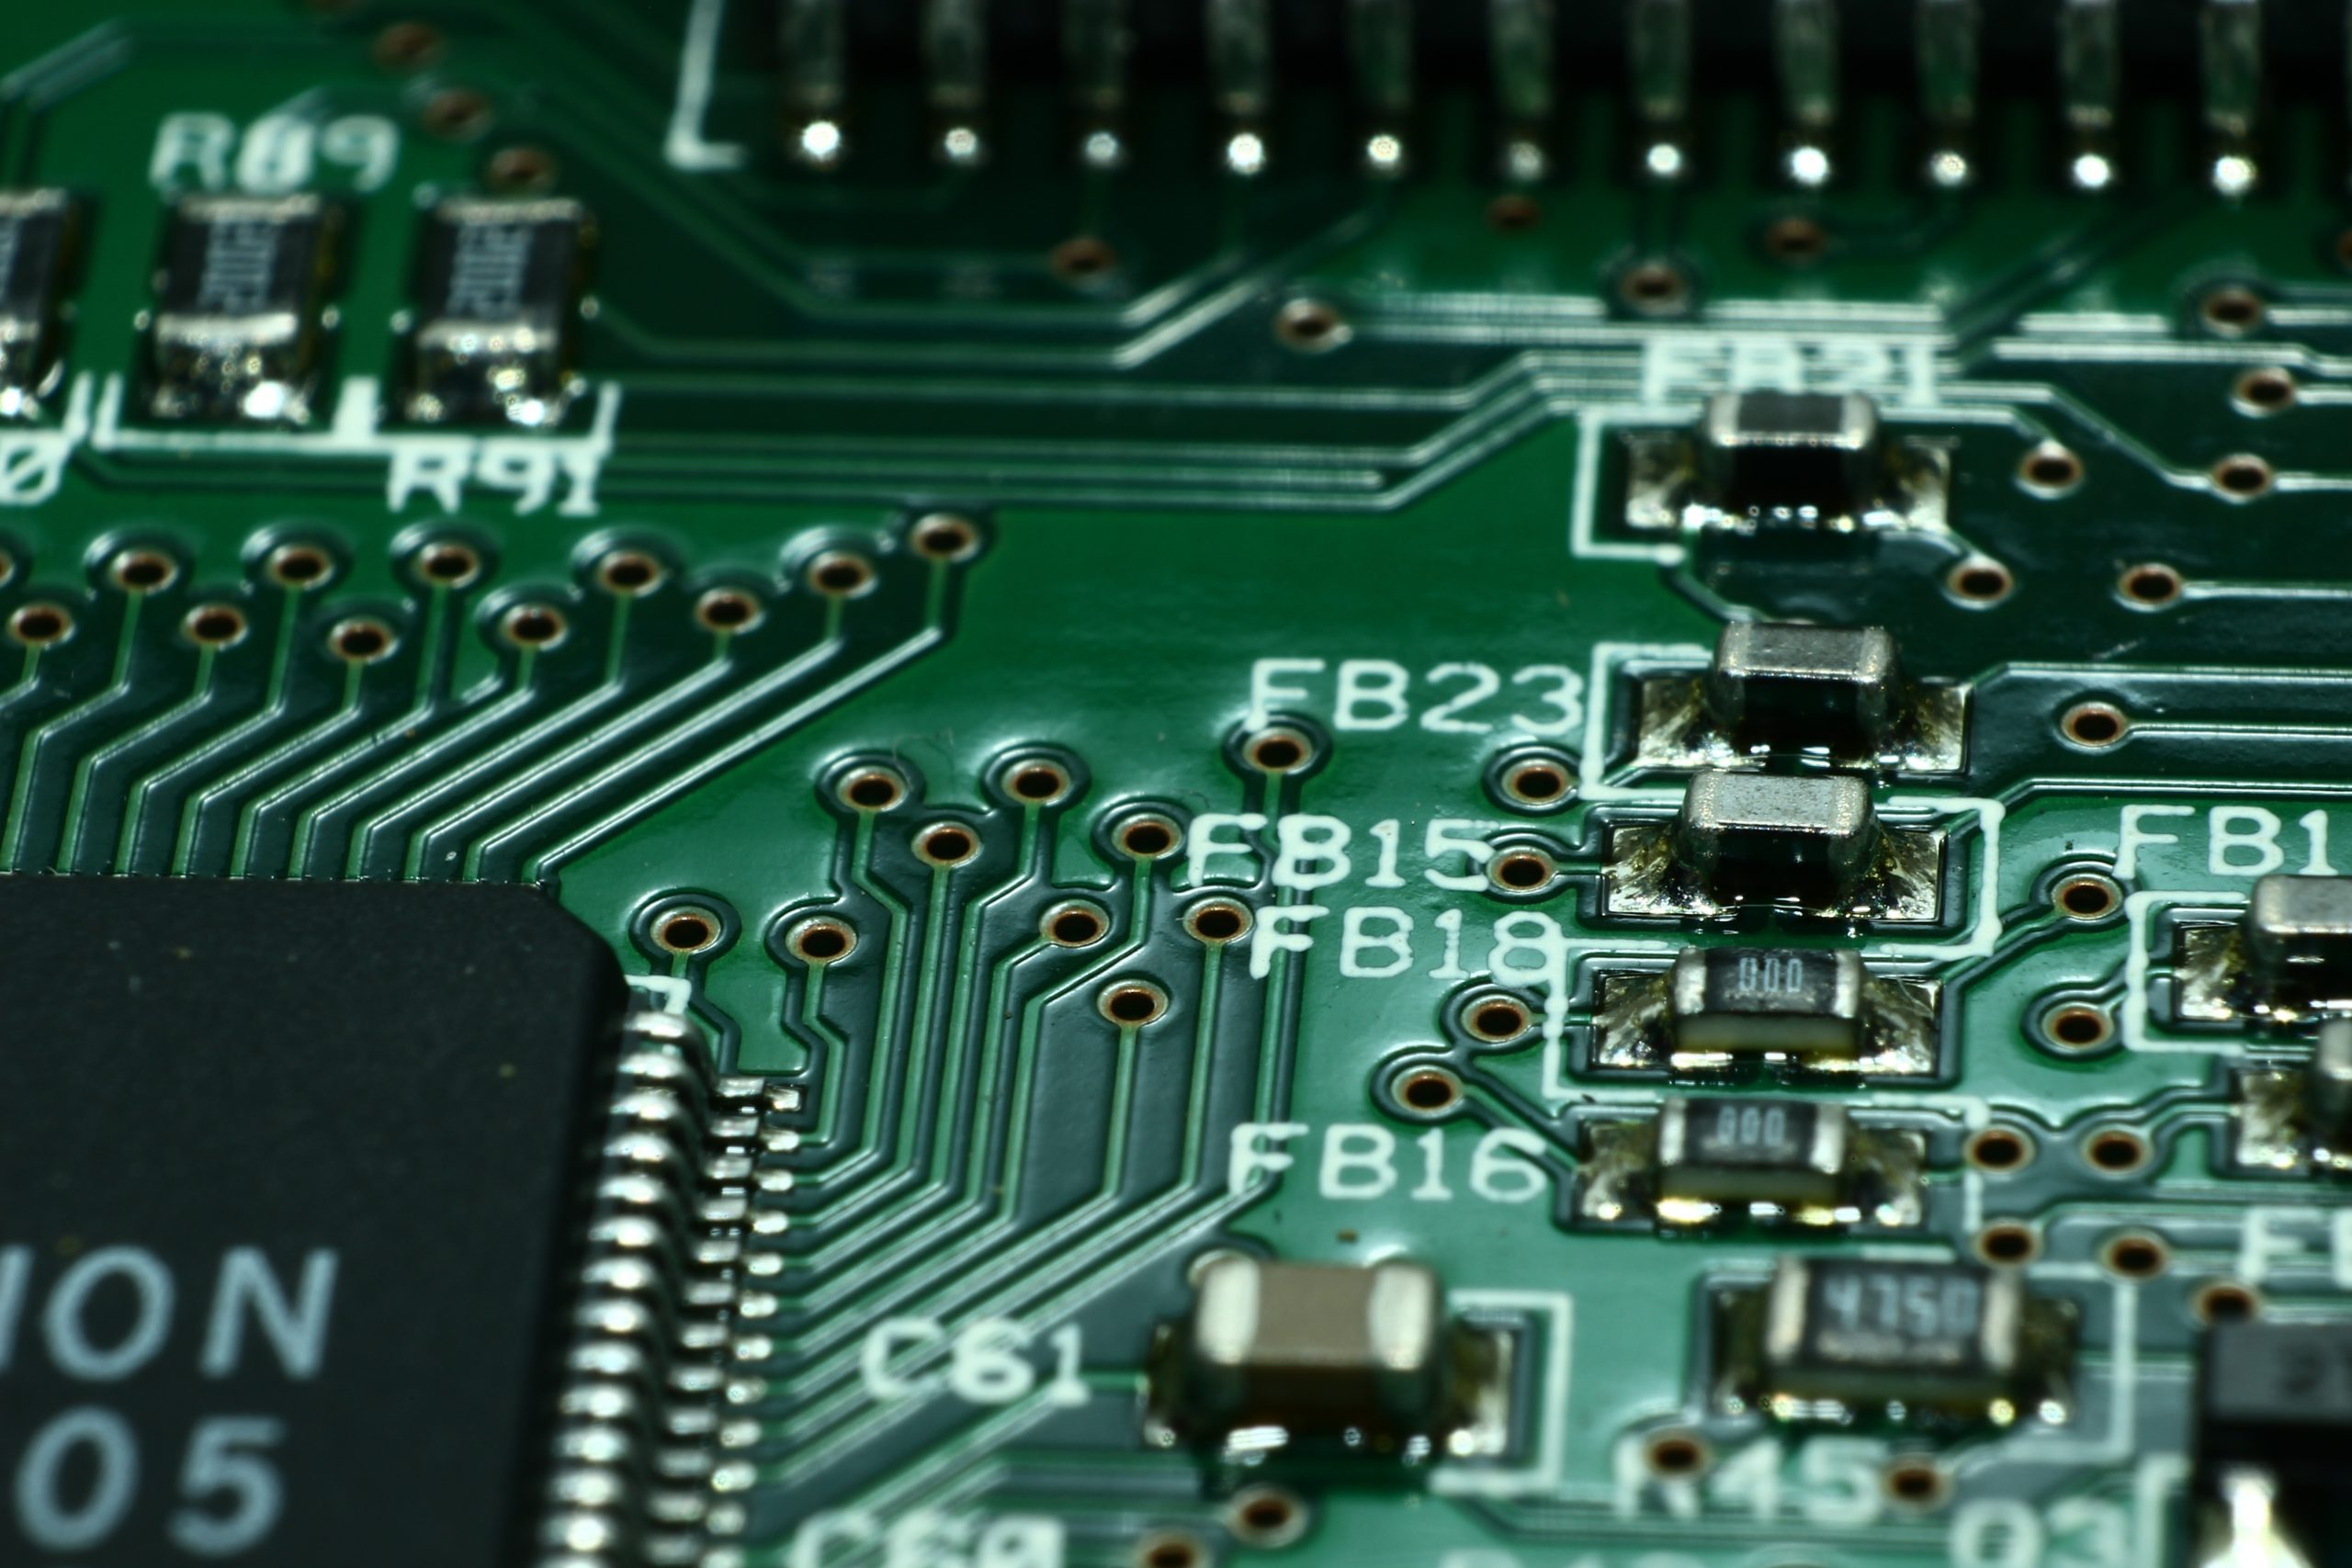 How To Identify Components on Printed Circuit Boards - AX Control, Inc.